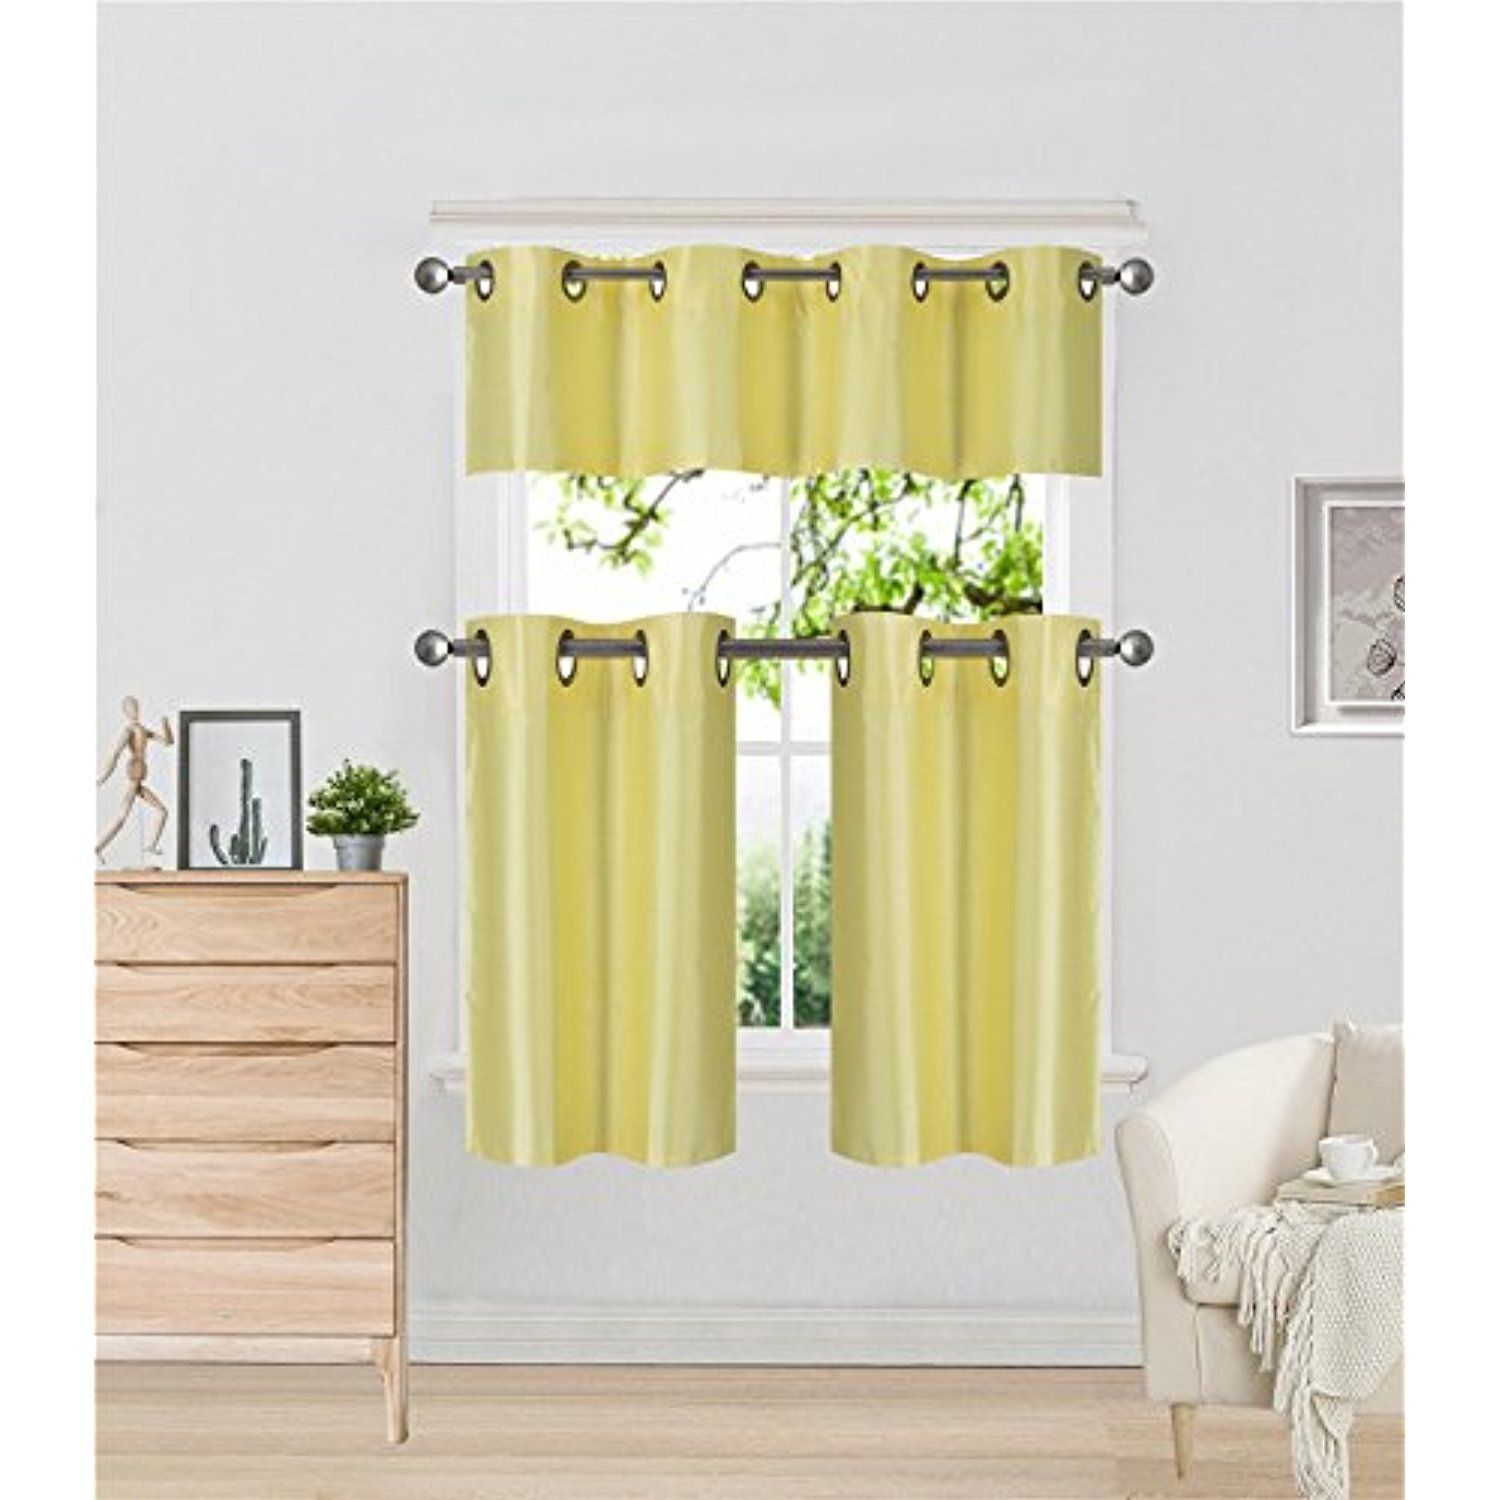 Elegant Home Collection 3 Piece Solid Color Faux Silk Pertaining To Faux Silk 3 Piece Kitchen Curtain Sets (View 10 of 20)